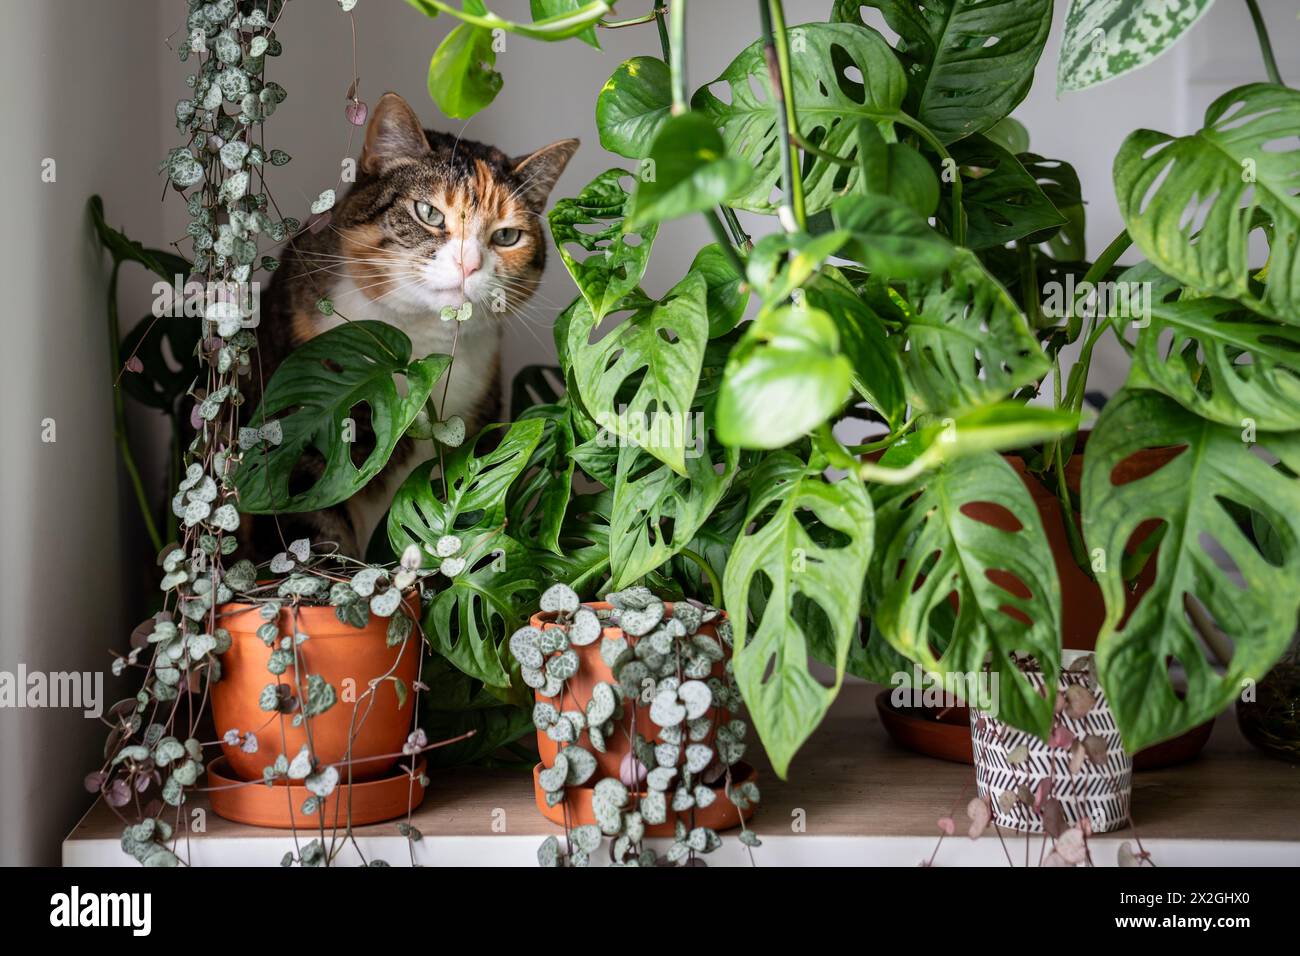 Curious cat sniffs and tastes Ceropegia houseplant, sitting among lush green potted plants at home Stock Photo